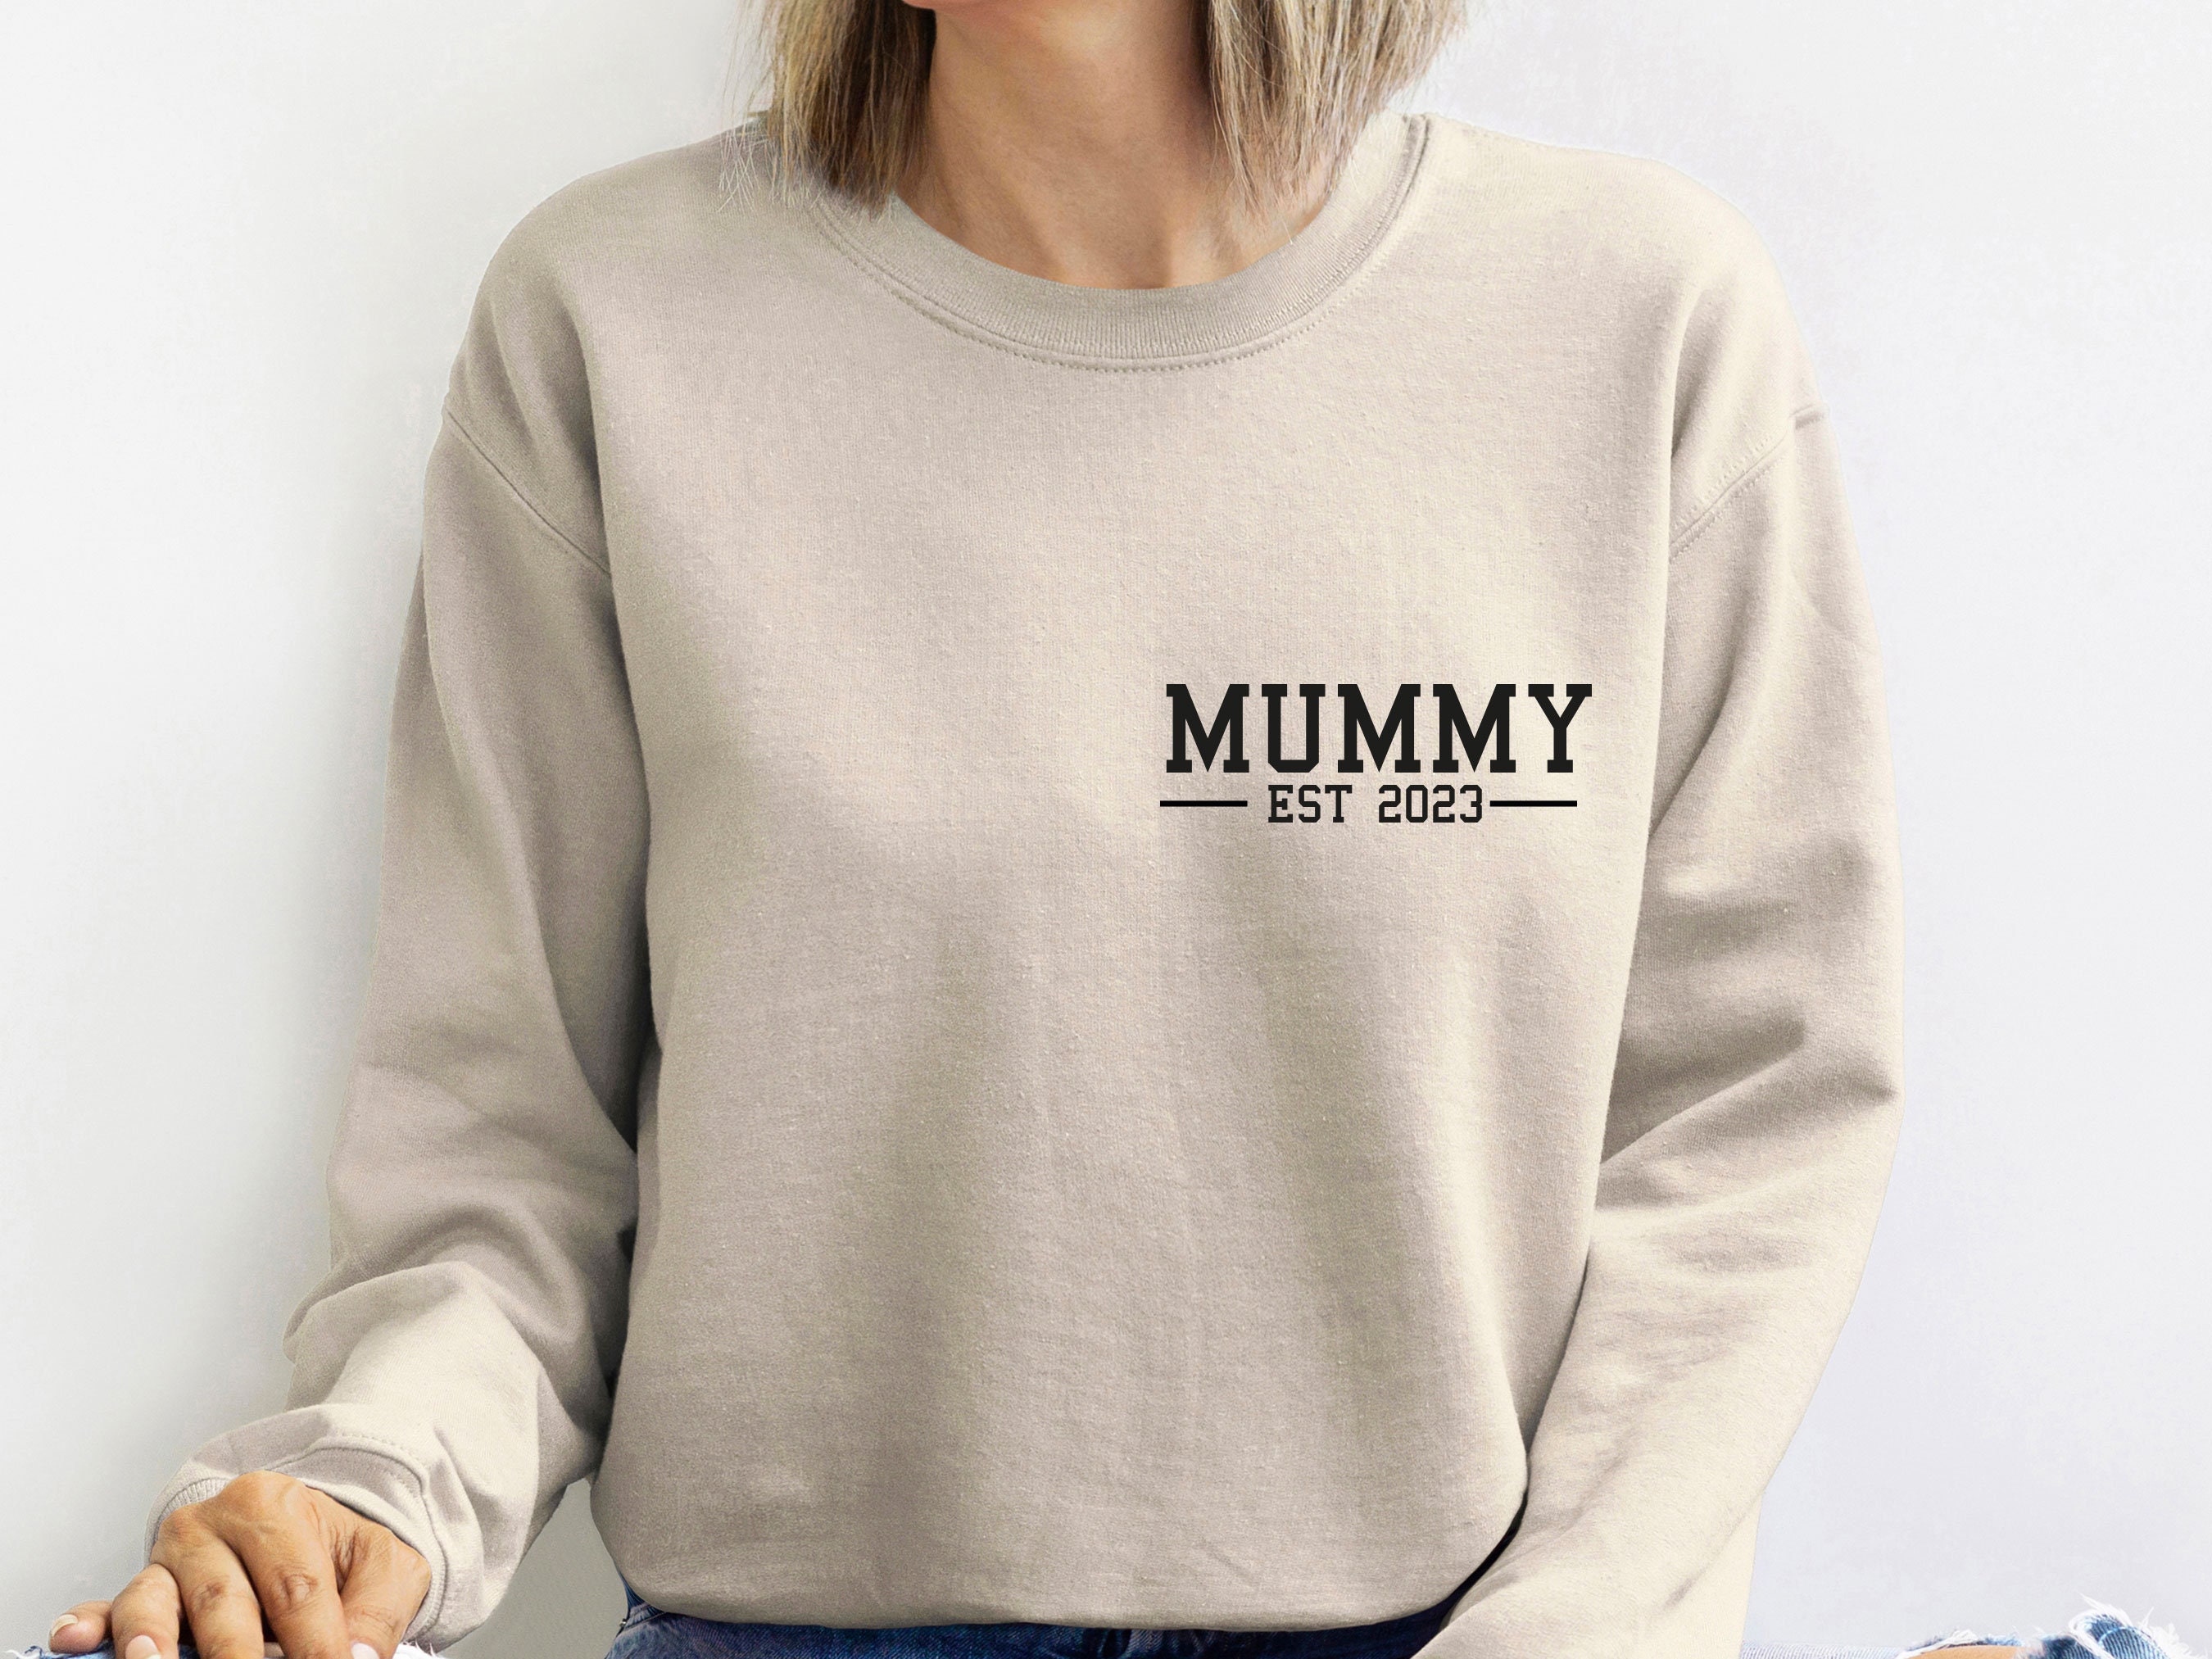 Mummy Sweatshirt, Mama Sweater, Personalised Mum, Custom Top, Mothers Day Jumper, Mother’s Gift, New Mum Gifts, To Be Jumper